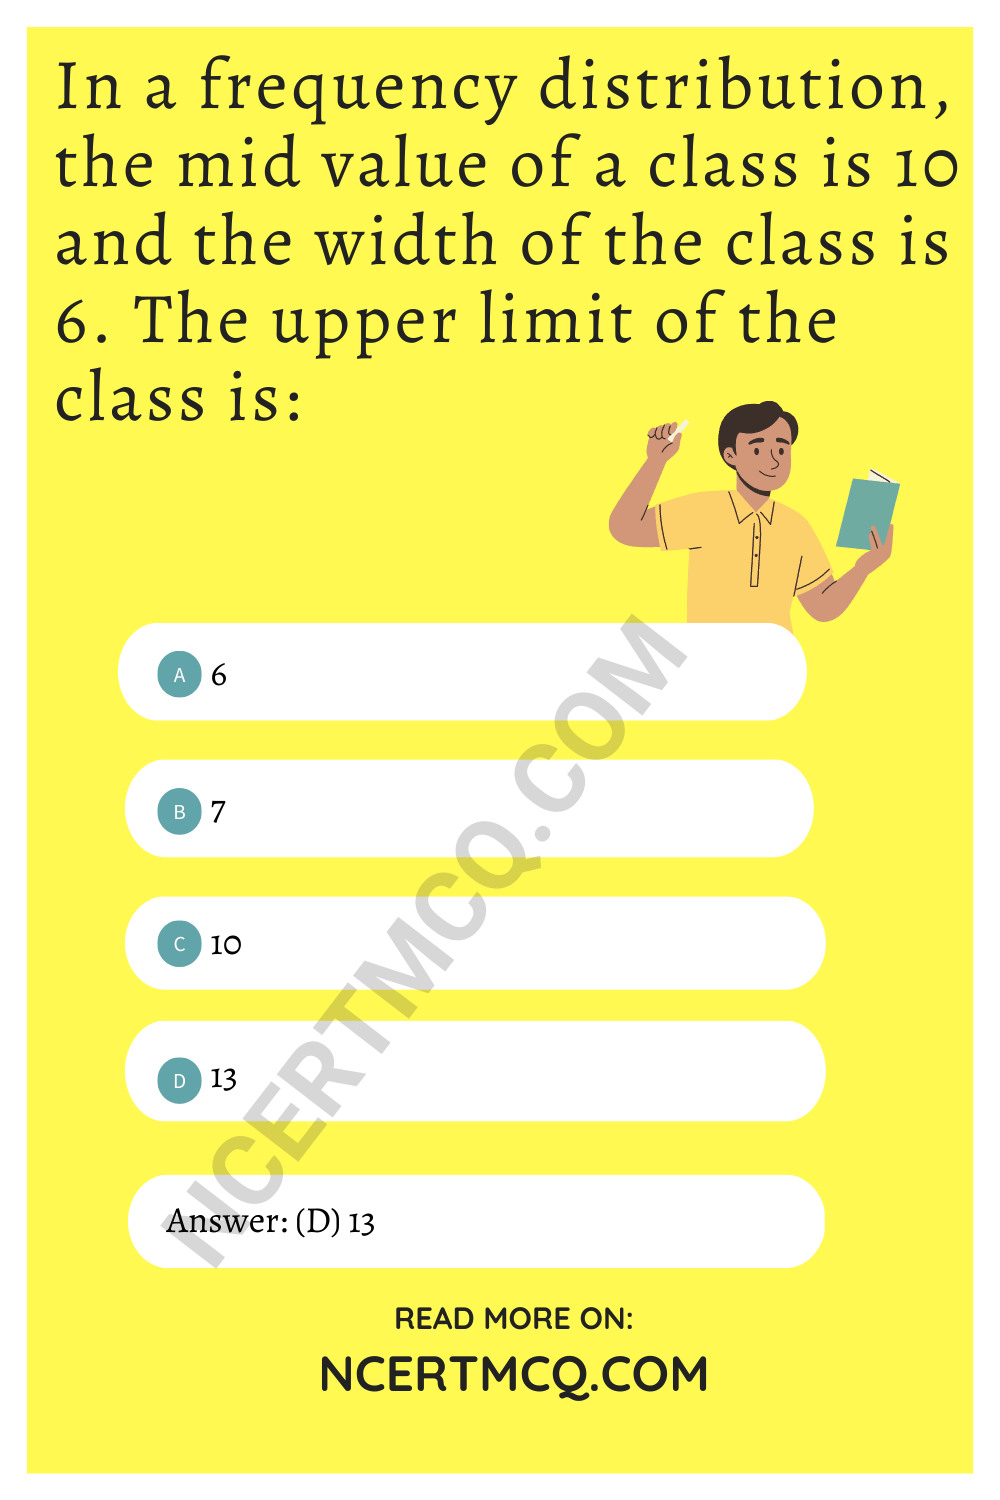 In a frequency distribution, the mid value of a class is 10 and the width of the class is 6. The upper limit of the class is: